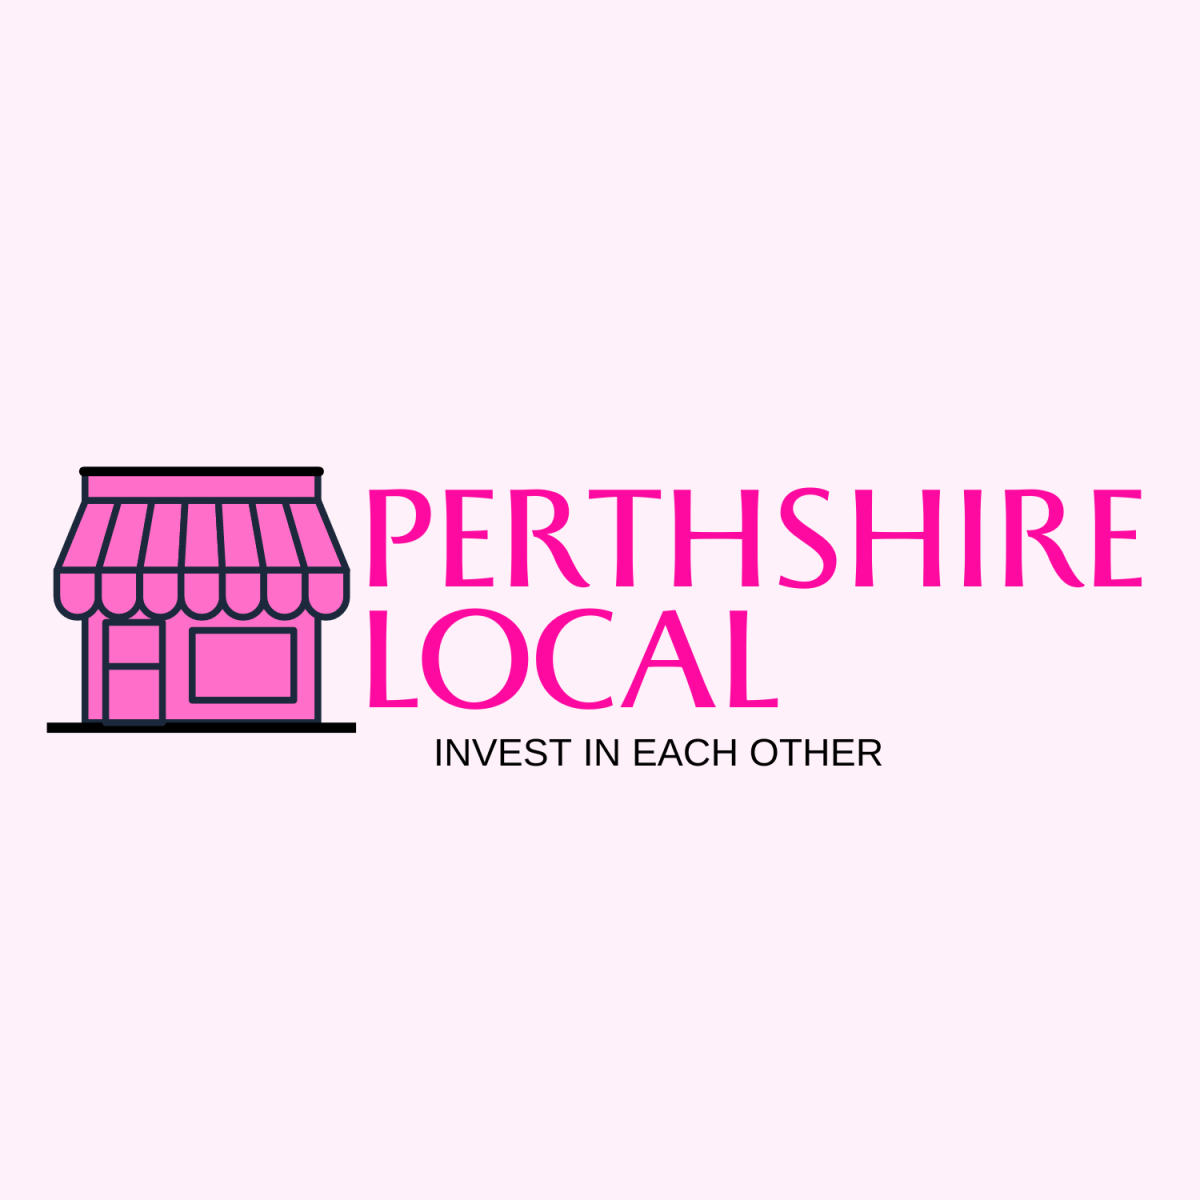 Perthshire Local Logo - The Lending Channel now listed on Perthshire Local App